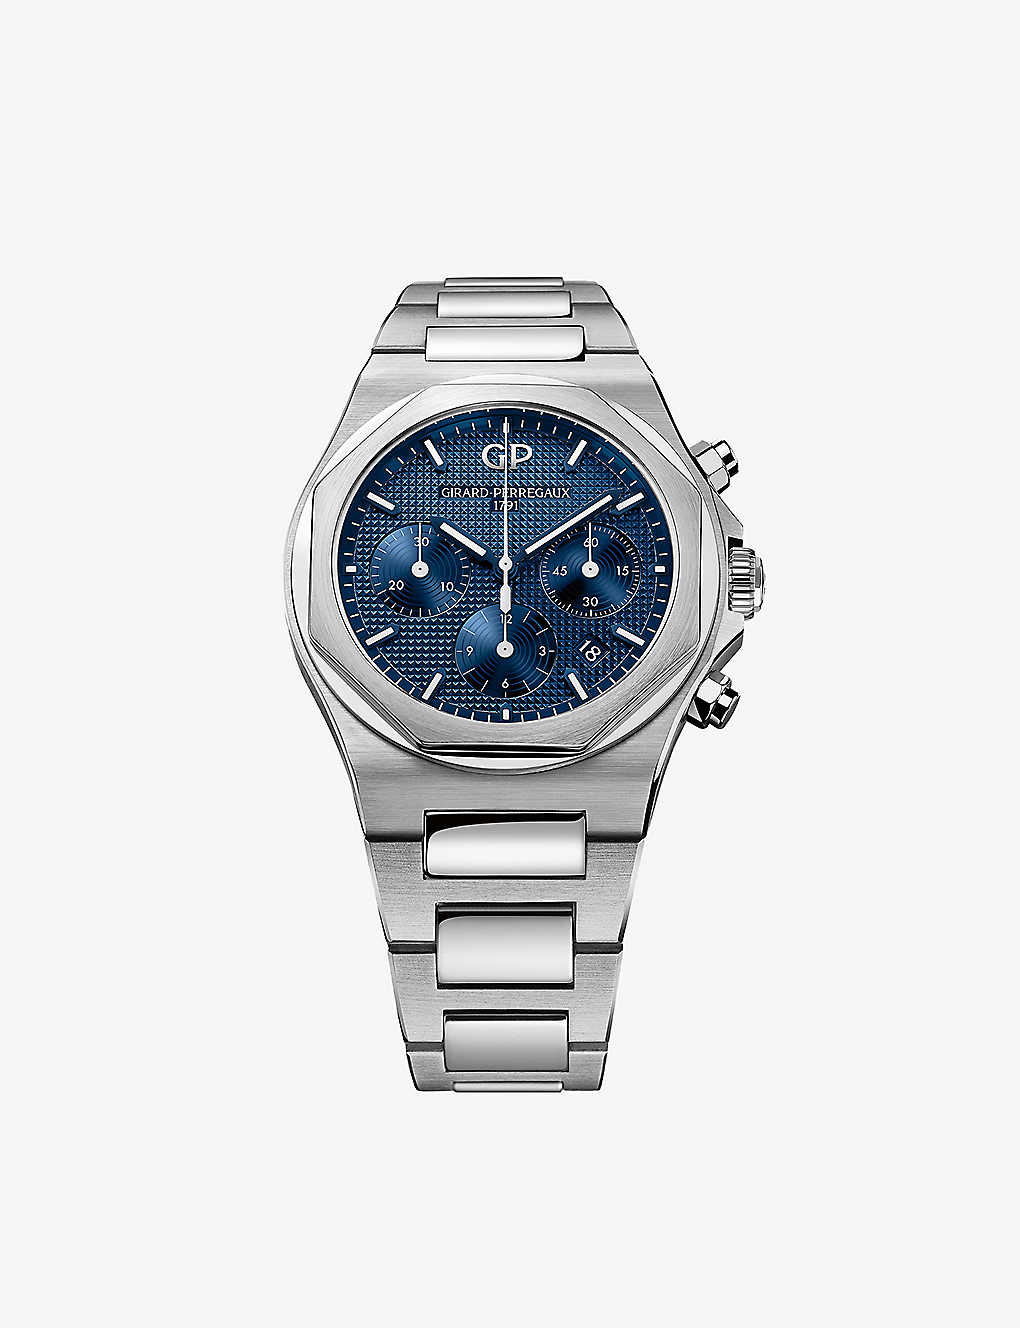 Girard-perregaux Mens Blue 81020-11-431-11a Laureato Chronograph Stainless-steel Automatic Watch